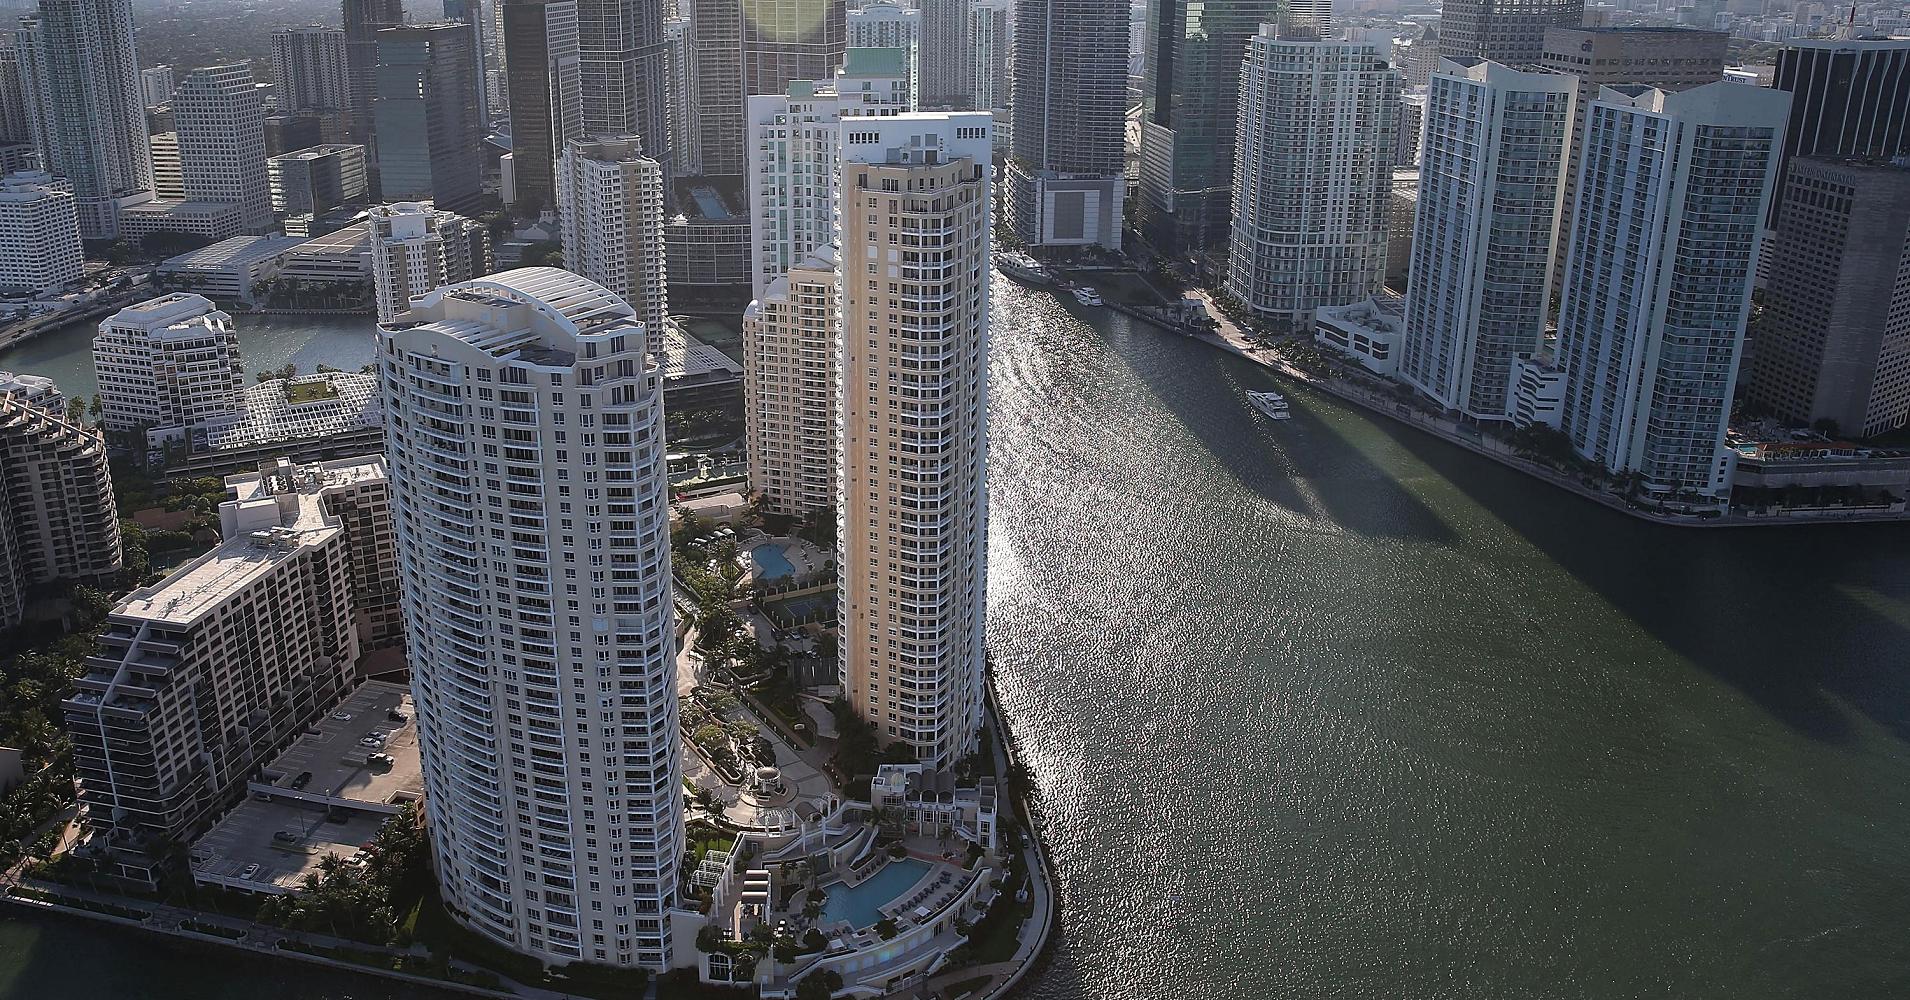 There's a one-bedroom condo for sale in Miami — and the seller will only accept bitcoin